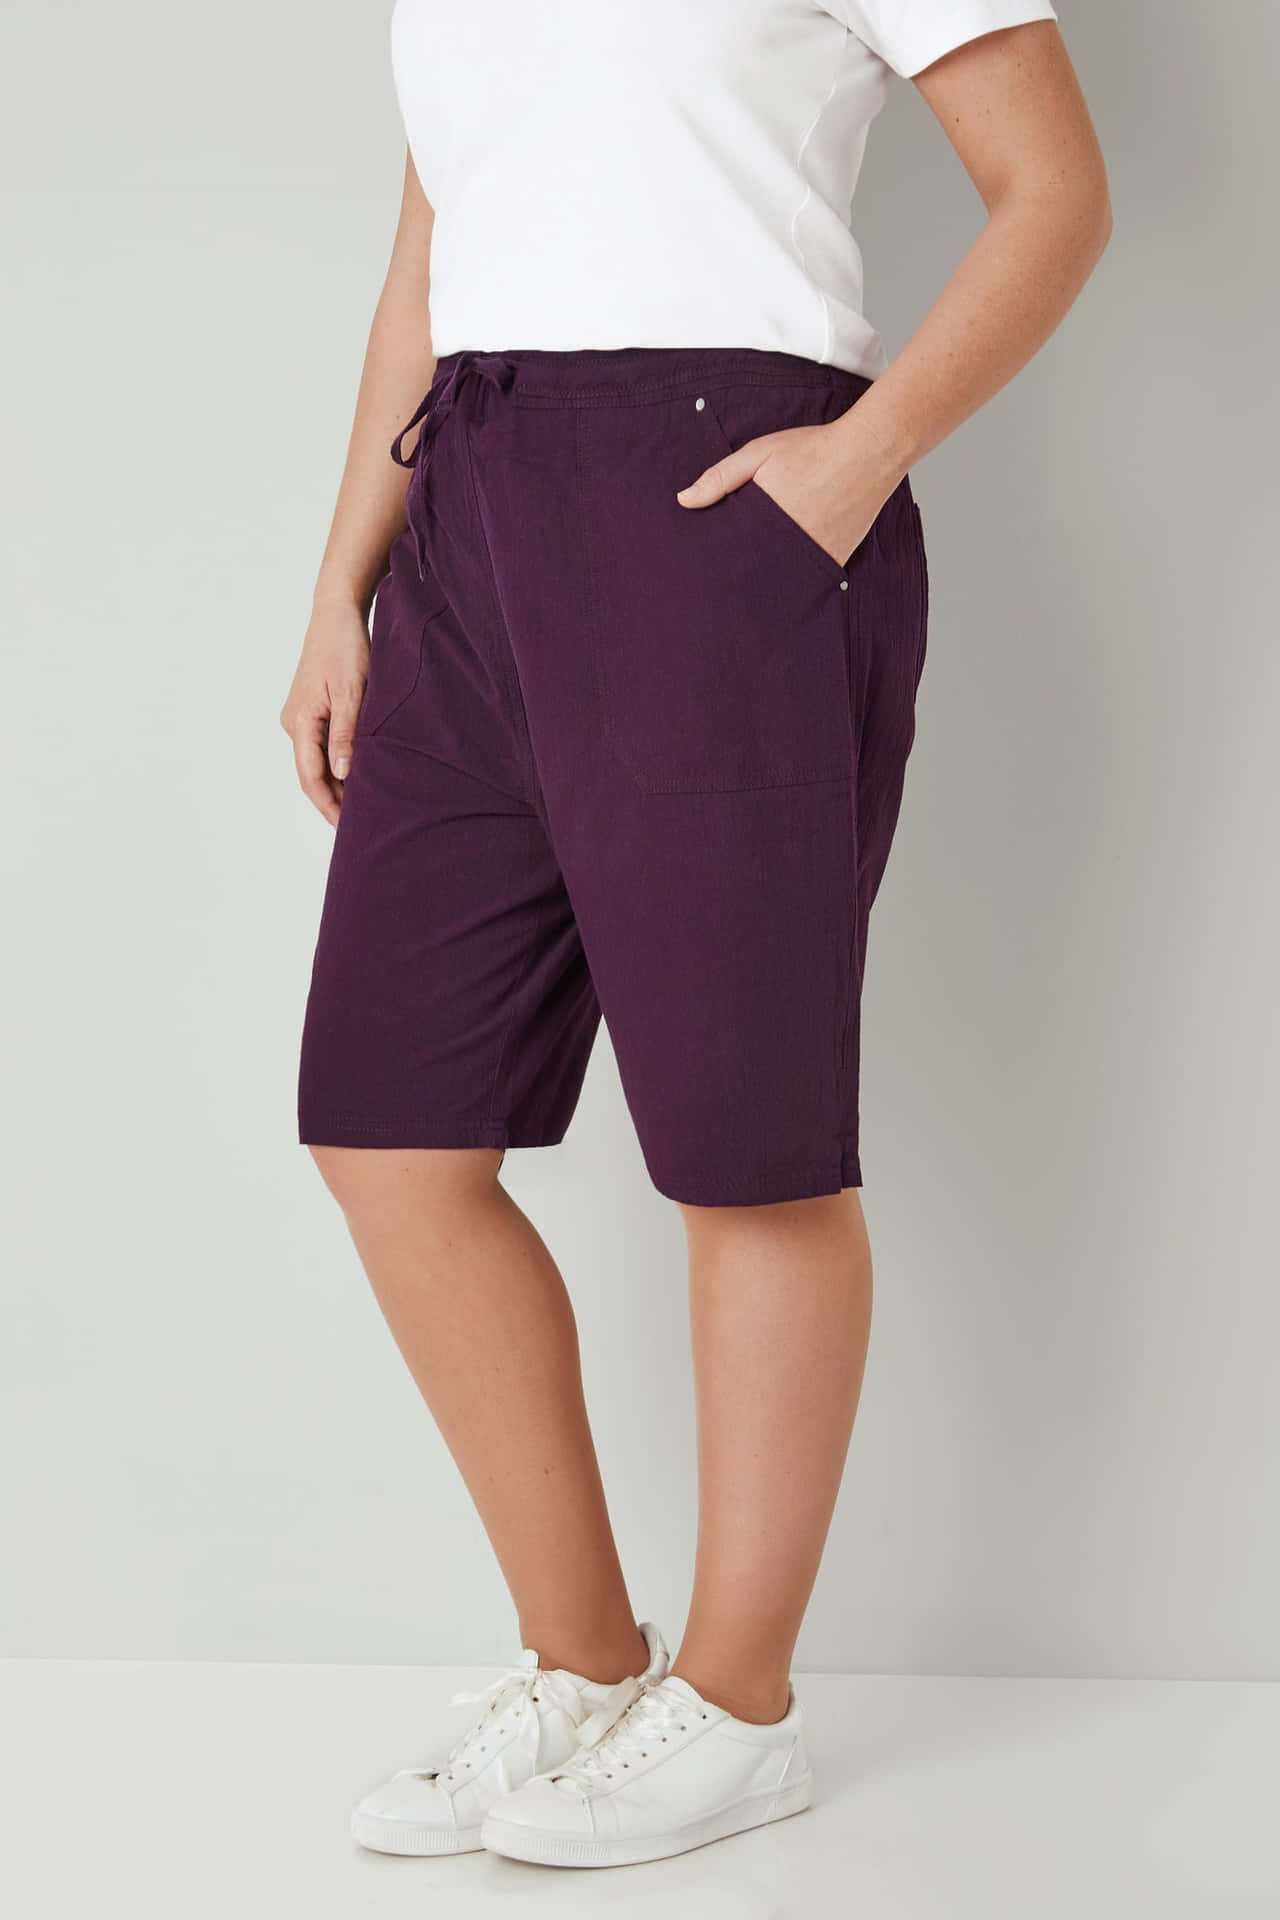 These bright purple shorts are perfect for any summer activity. Wallpaper